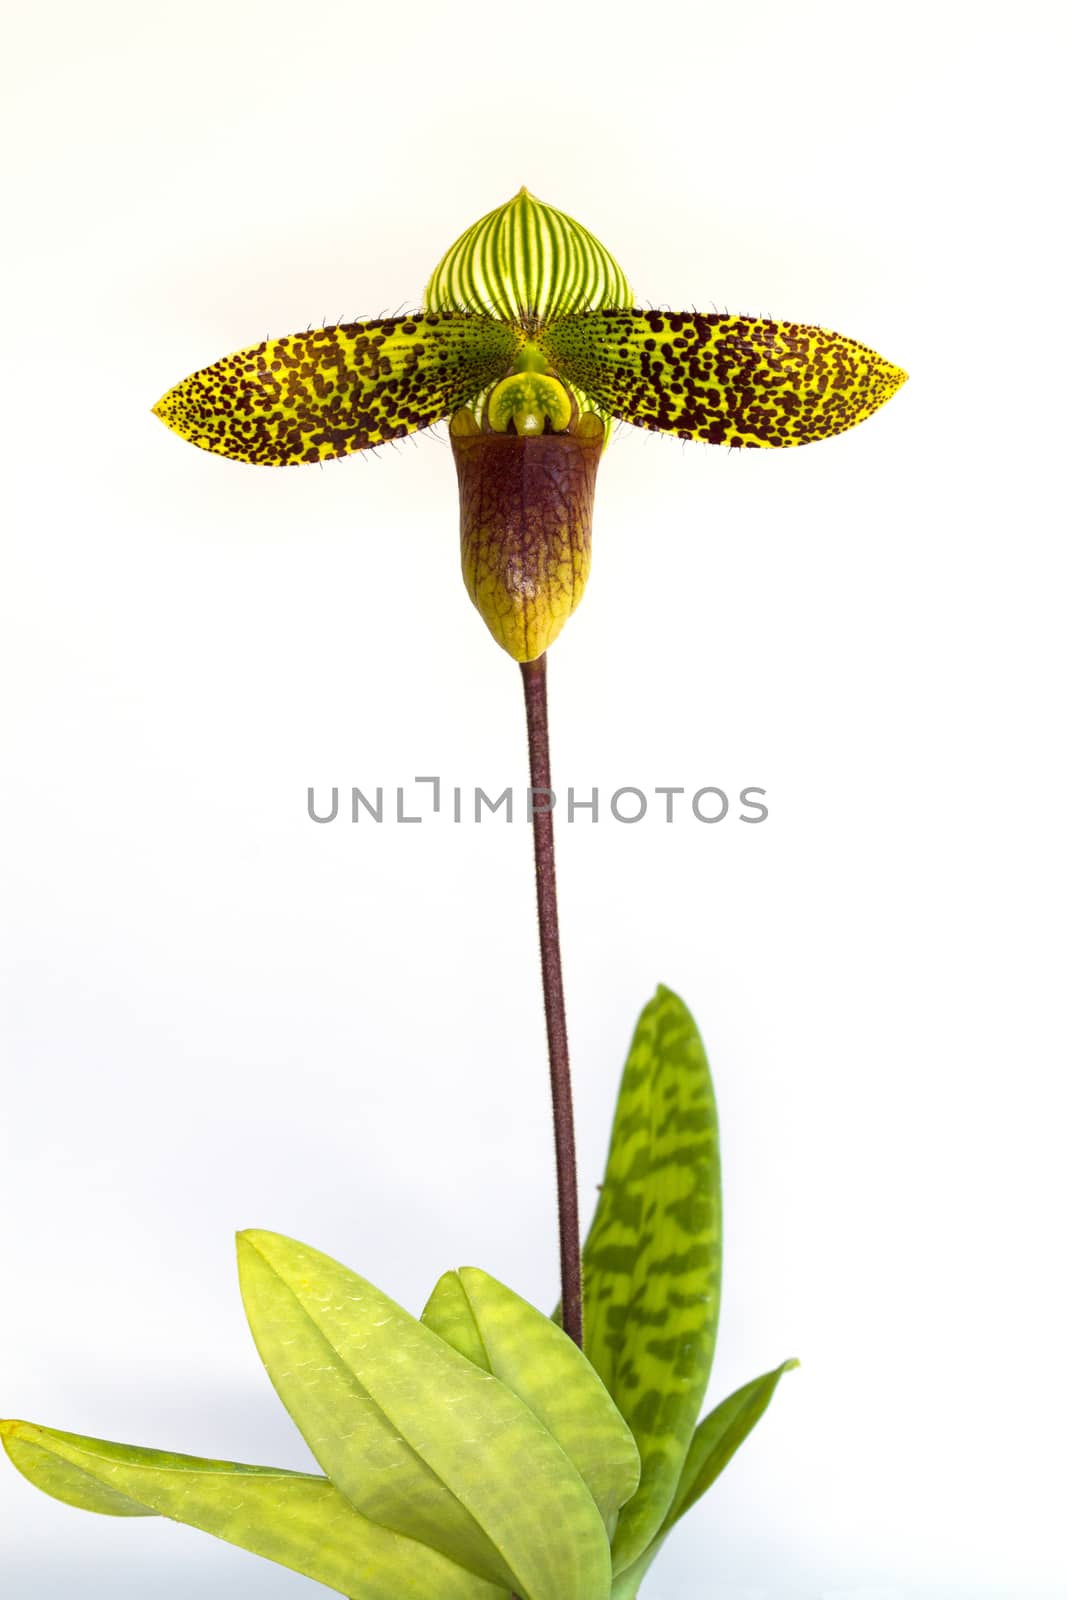 Paphiopedilum orchid flowers with  on  white background.